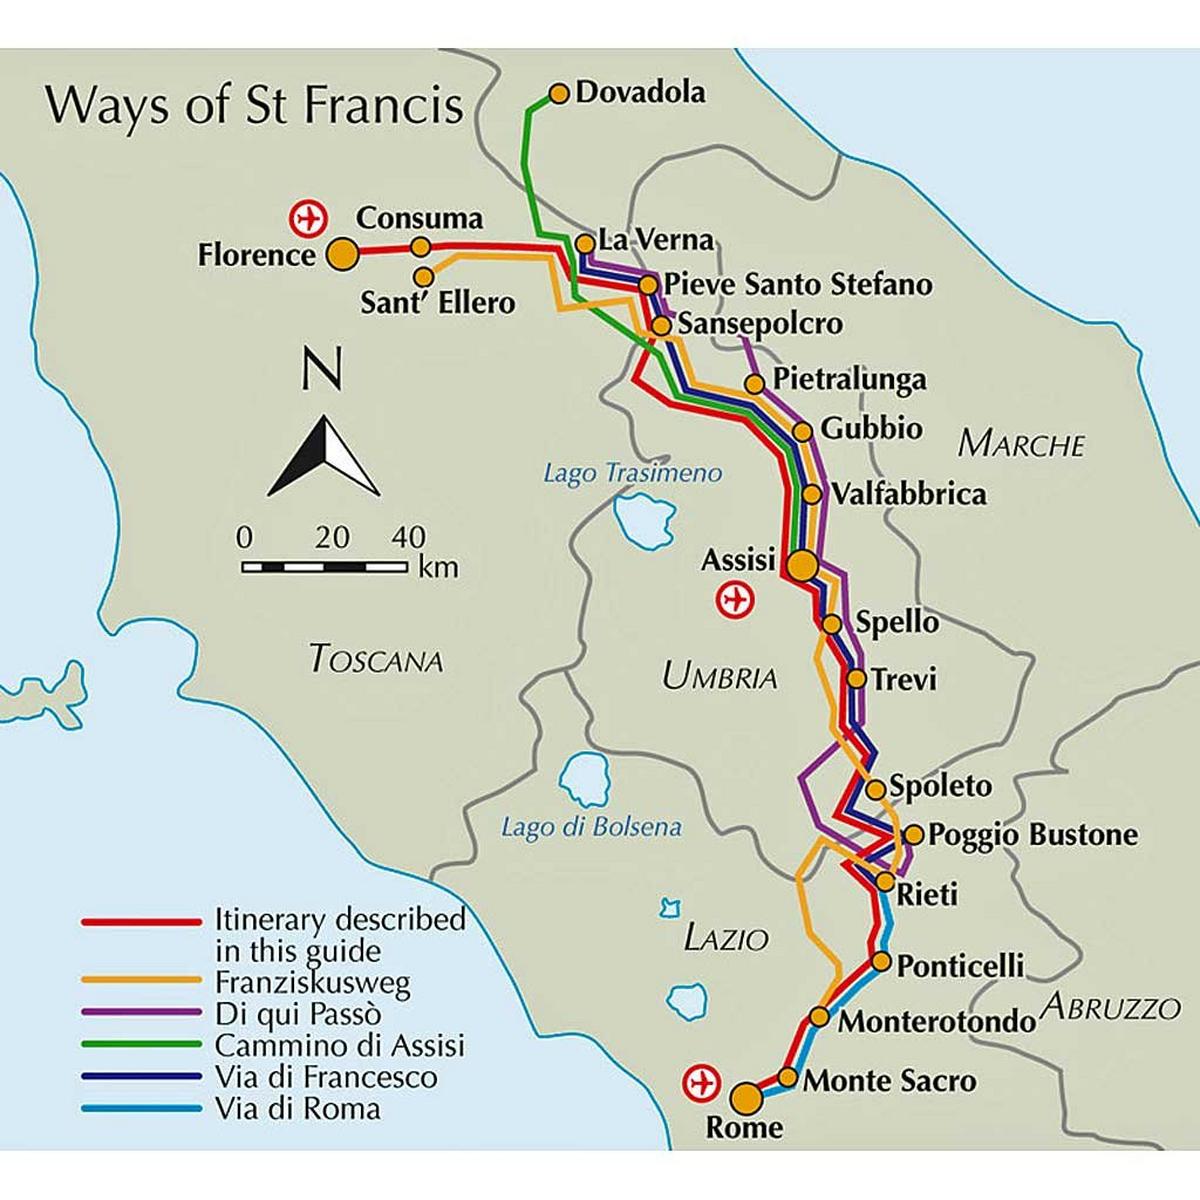 Cicerone Guide Book: The Way of St. Francis